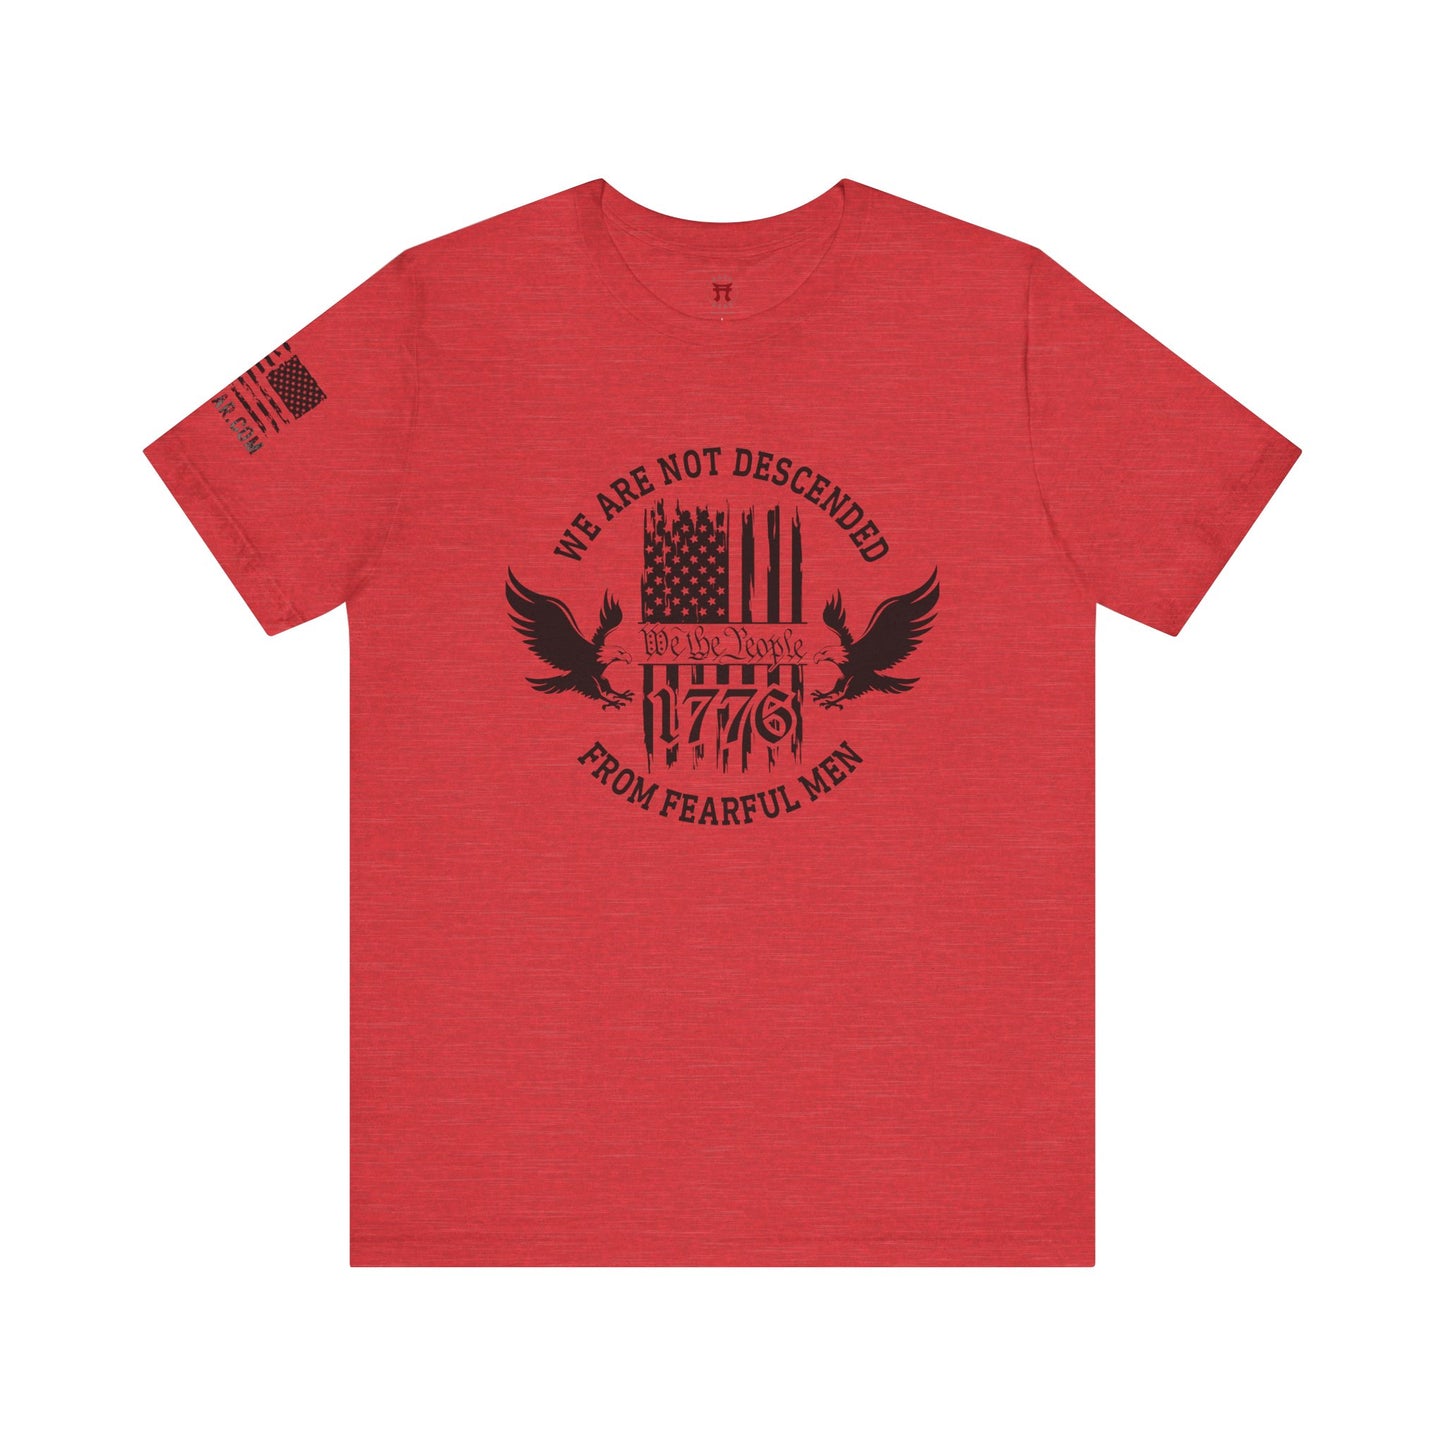 Rakkgear We Are Not Descended Short Sleeve Tee in red